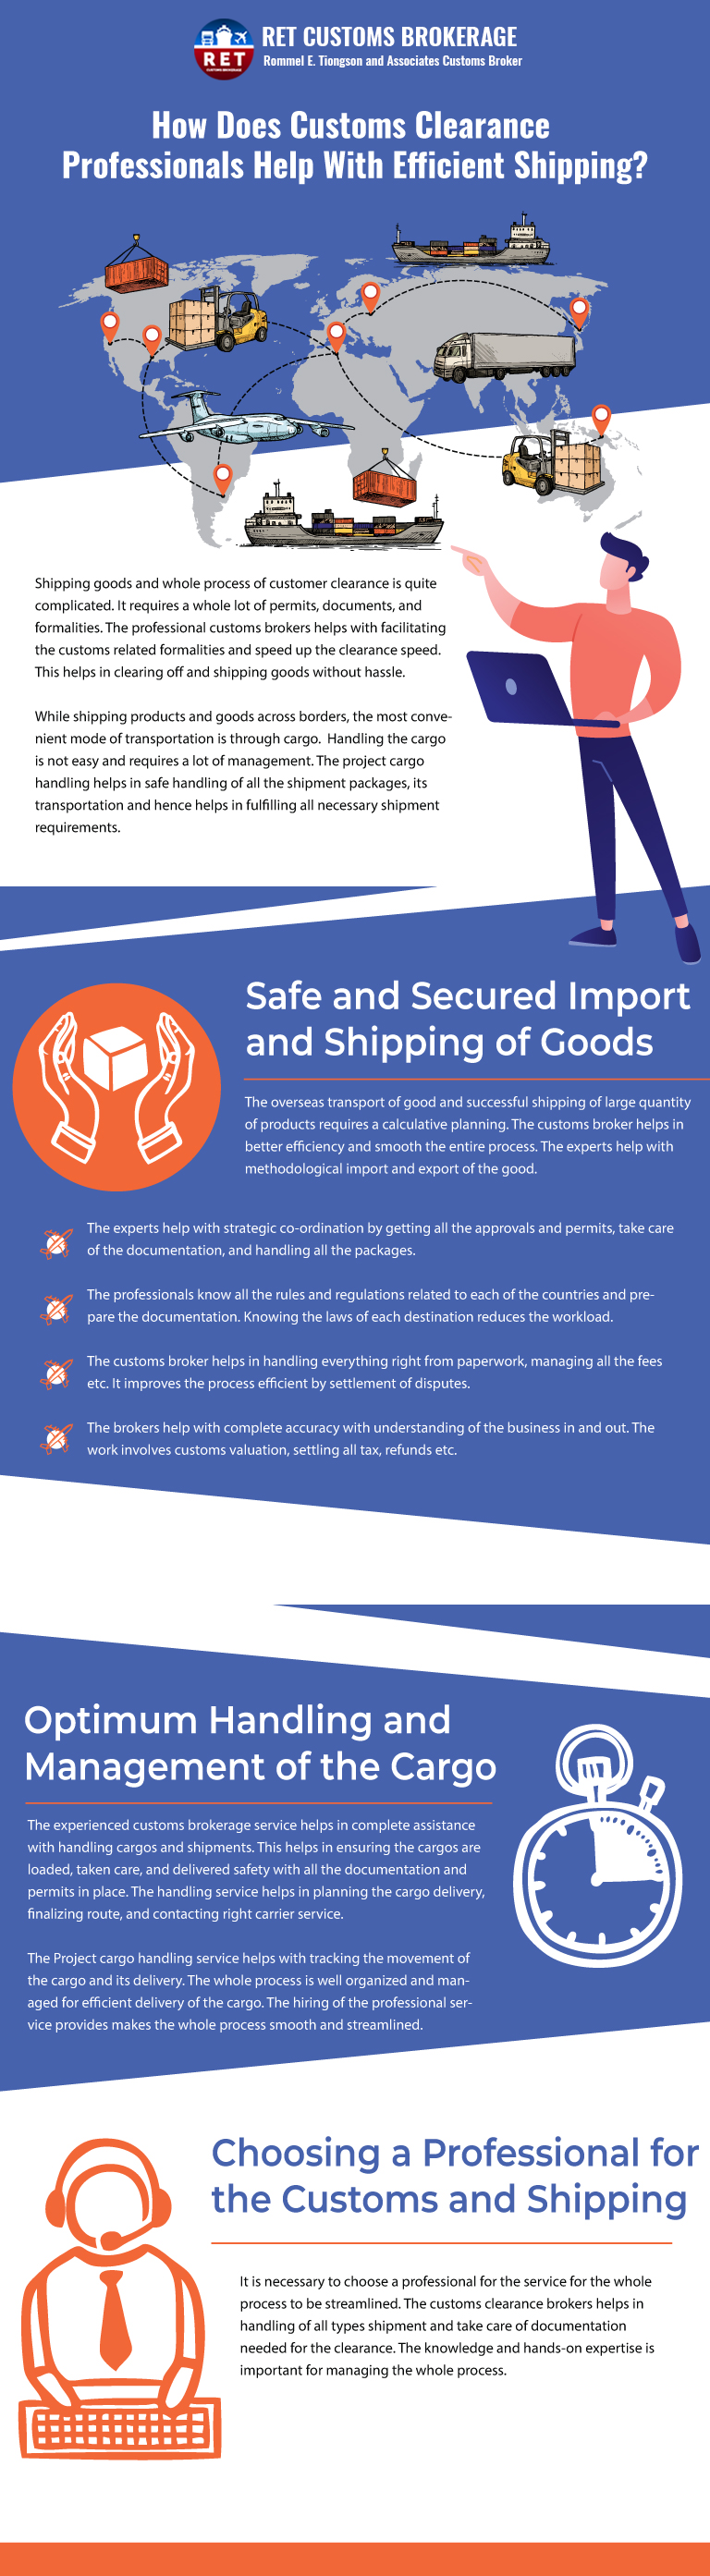 How Does Customs Clearance Professionals Help With Efficient Shipping?